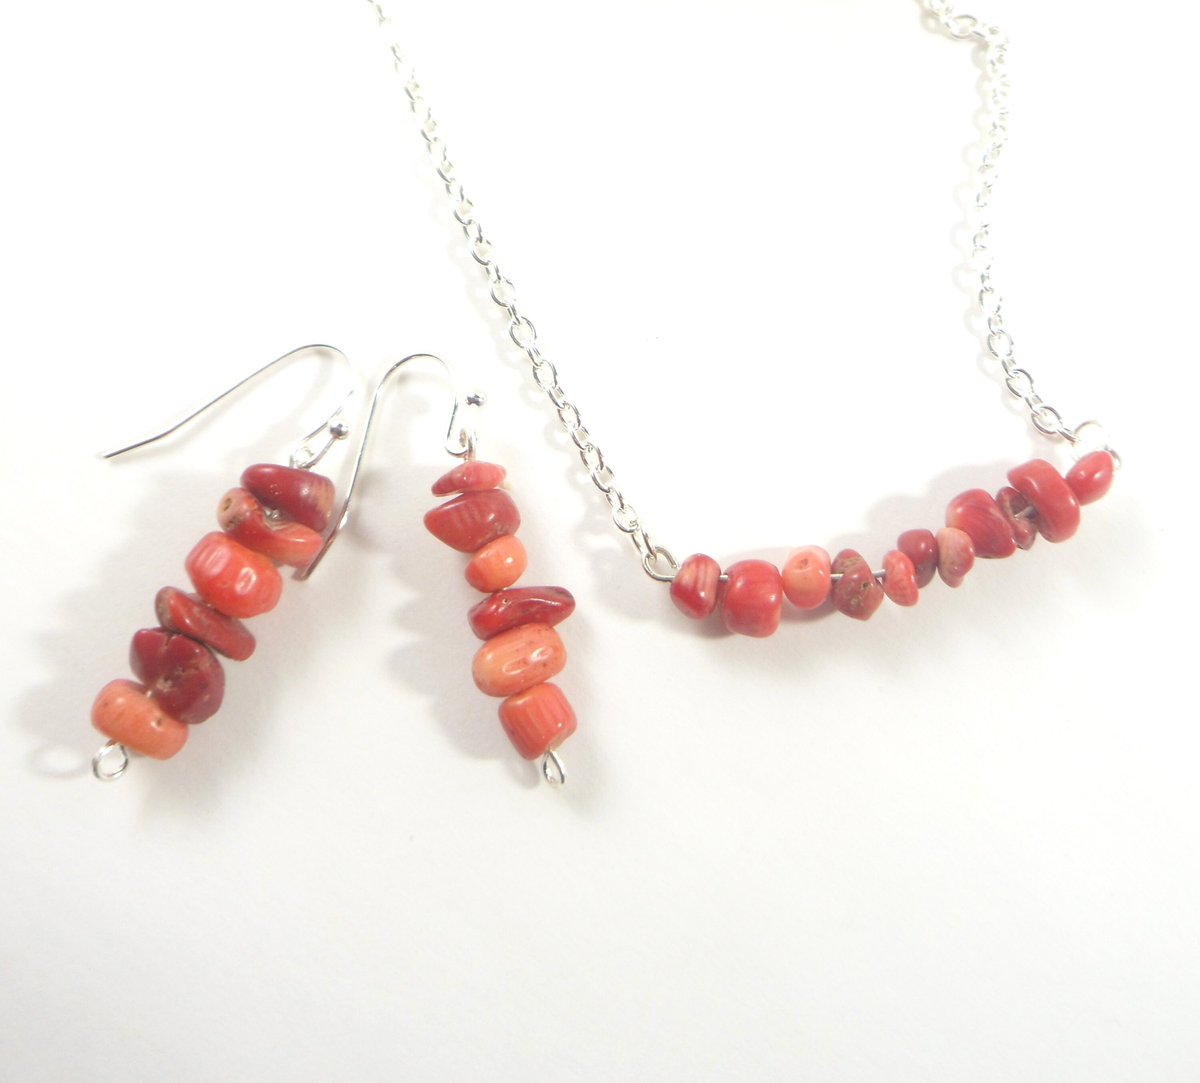 Red Coral Chip Layering Necklace Southwestern Style Santa Fe New Mexico Albuquerque Gemstone Jewelry Traditional Red Coral Jewelry Set tuppu.net/8887875b #NewMexico #EtsySeller #SantaFe #EtsyShop #GemstonePendant